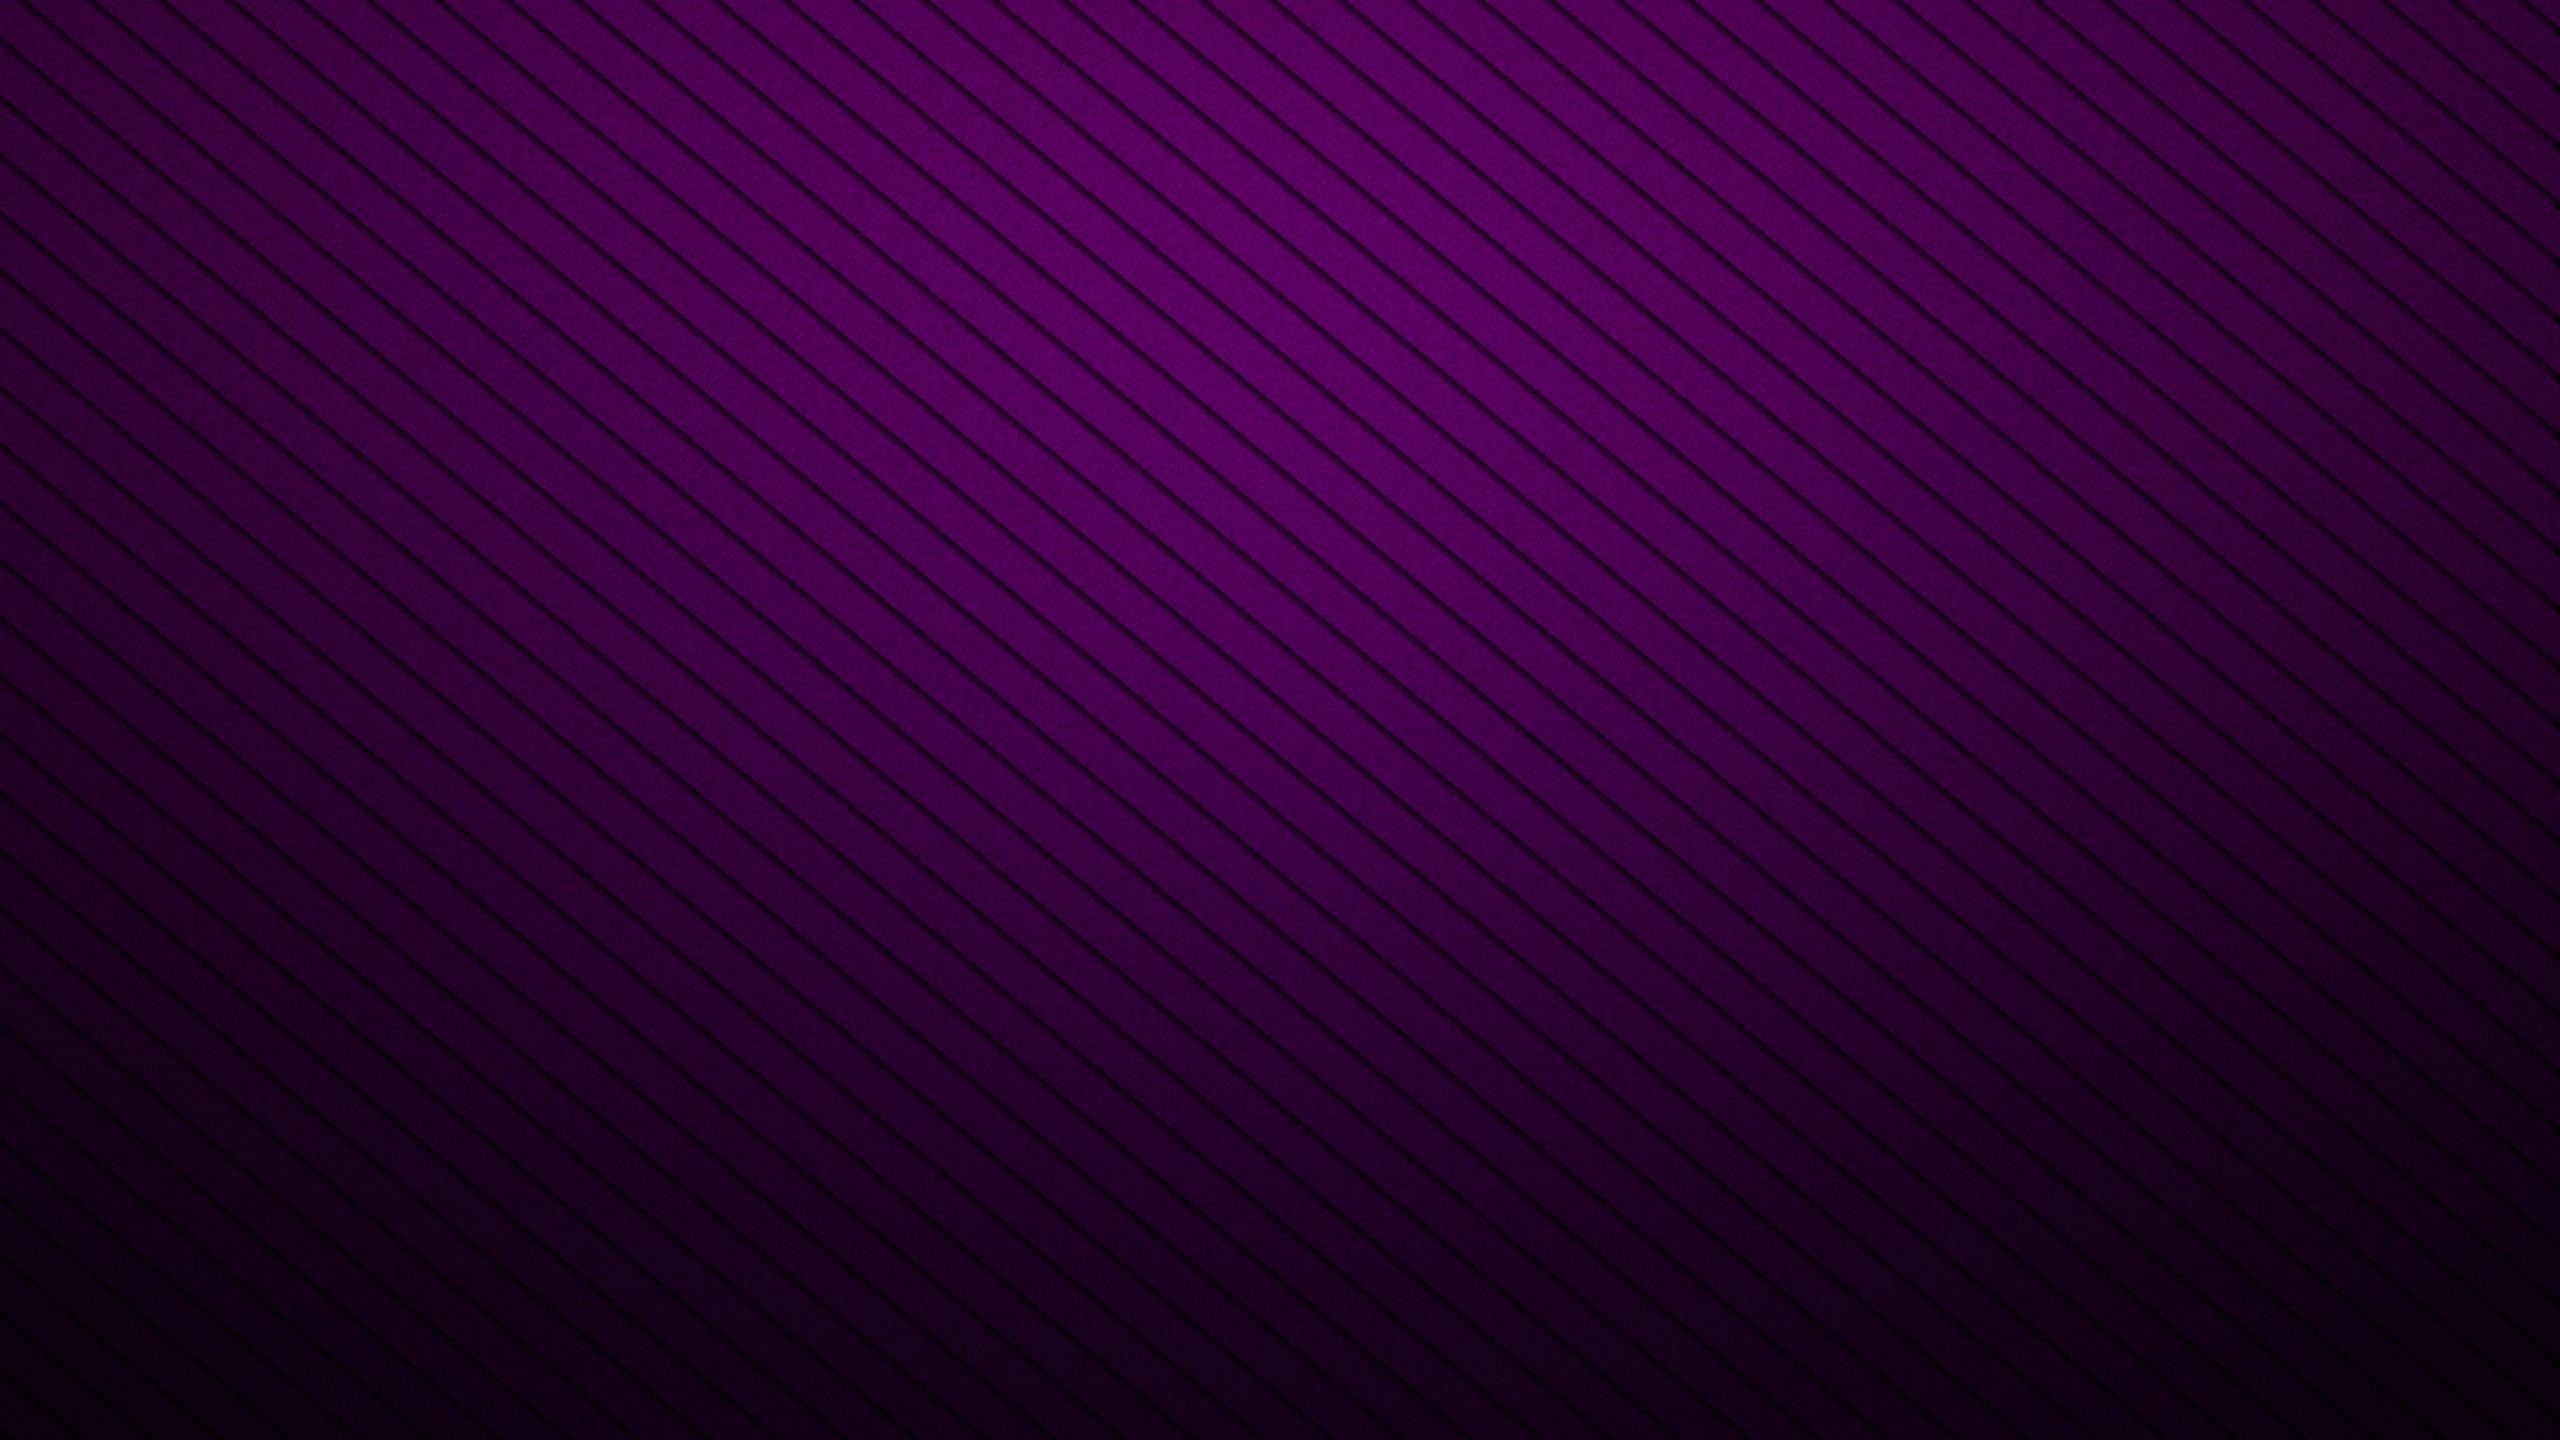 2560x1440  Purple And Black Texture Wallpaper Hd Picture 62141 Label: and .